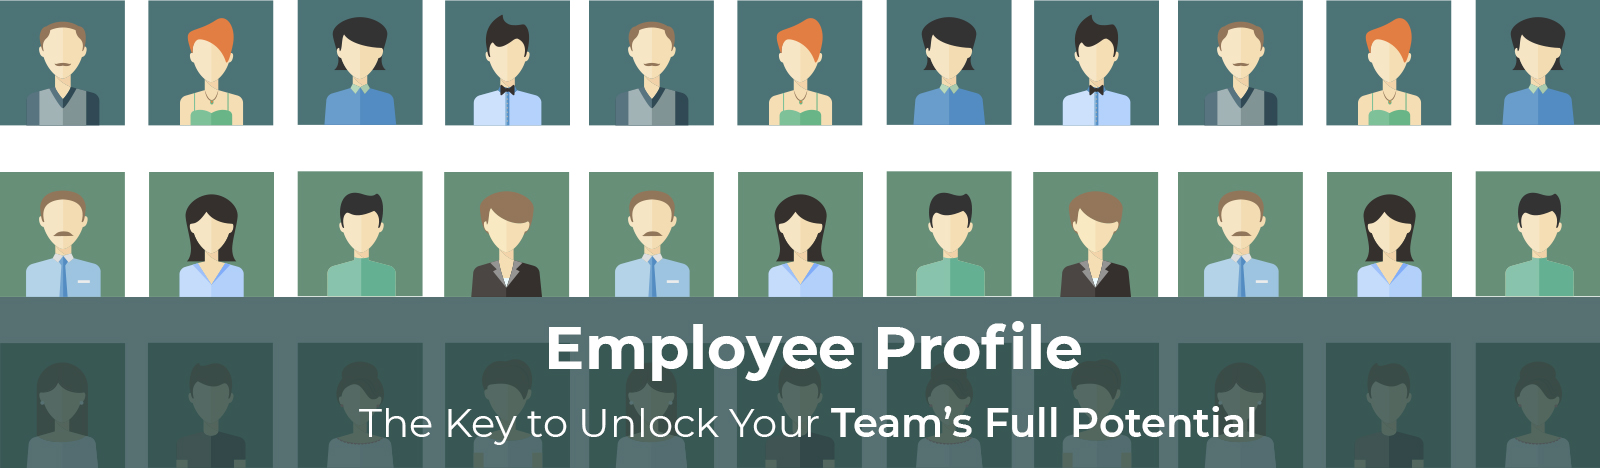 Employee Profile is The Key to Unlock Your Team’s Full Potential